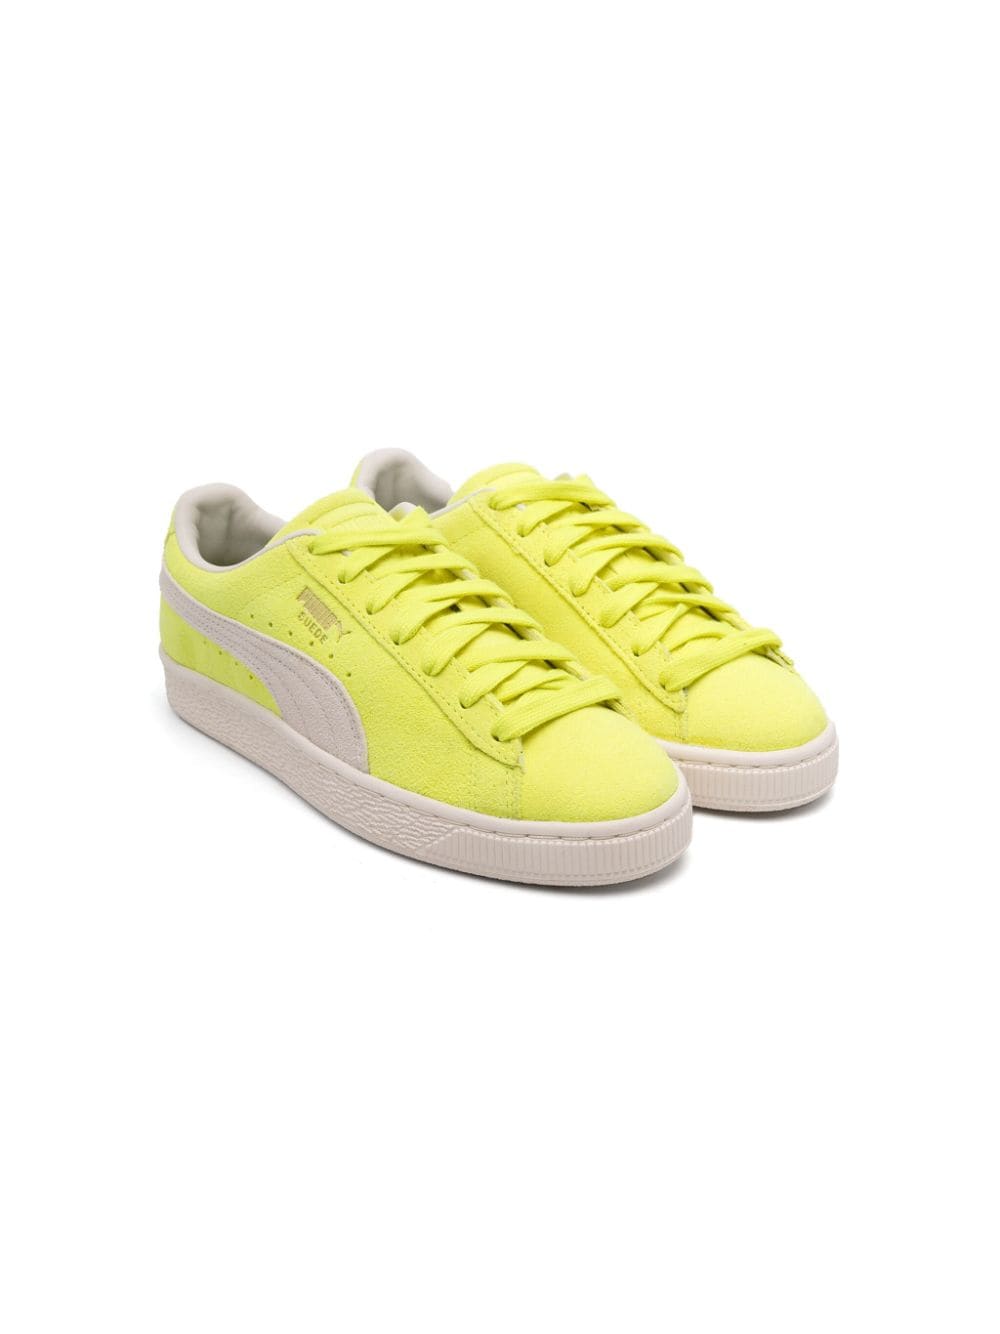 Puma Kids' Formstrip Suede Sneakers In Yellow